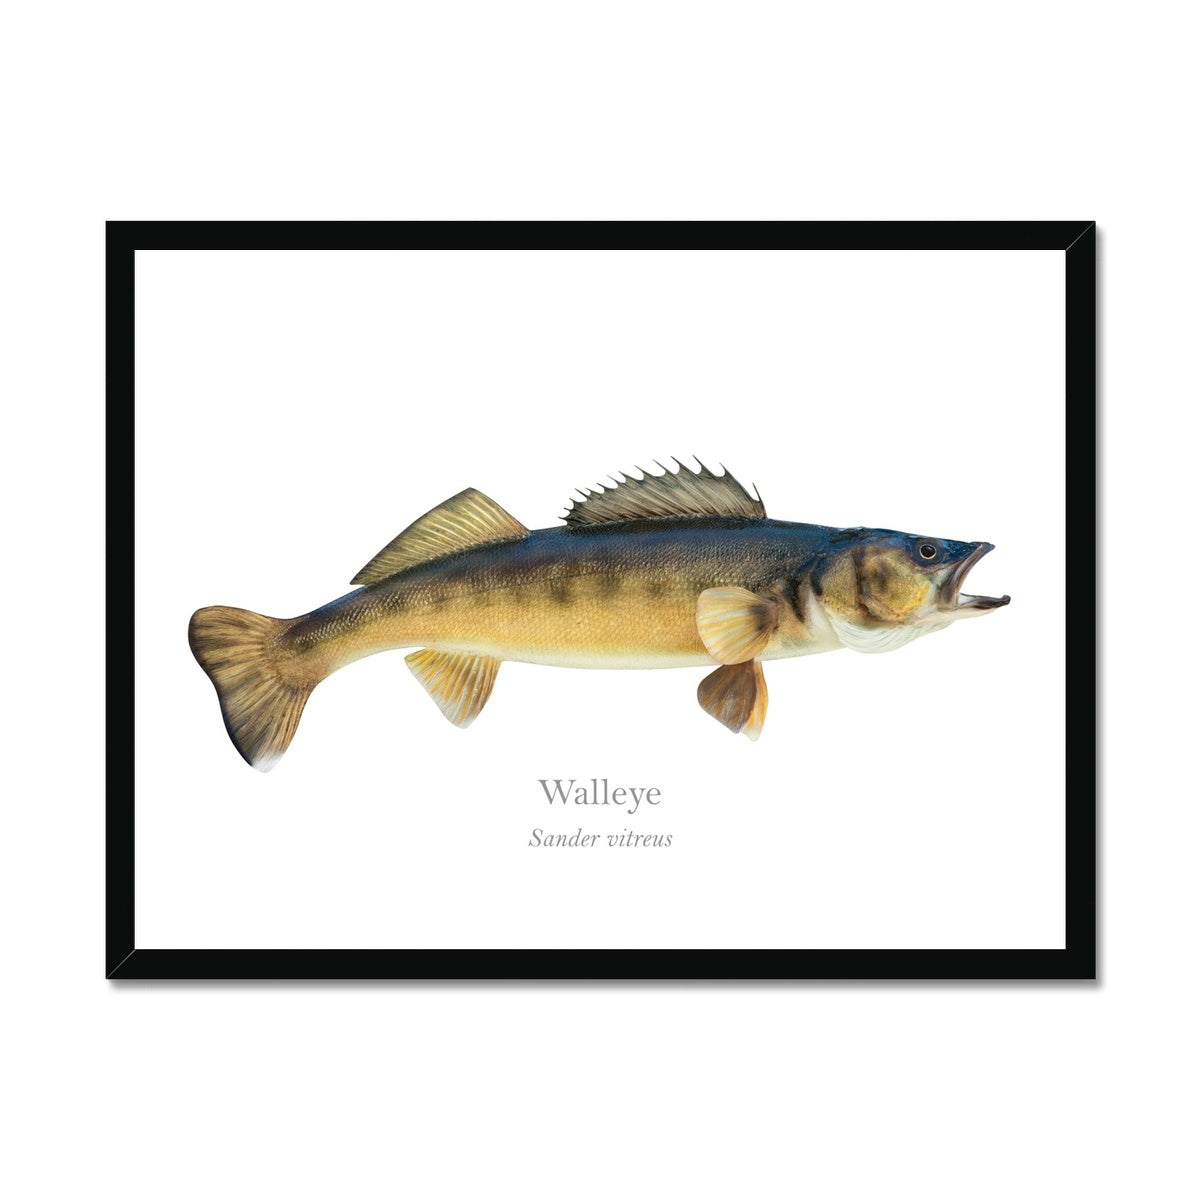 Walleye - Framed Print - With Scientific Name